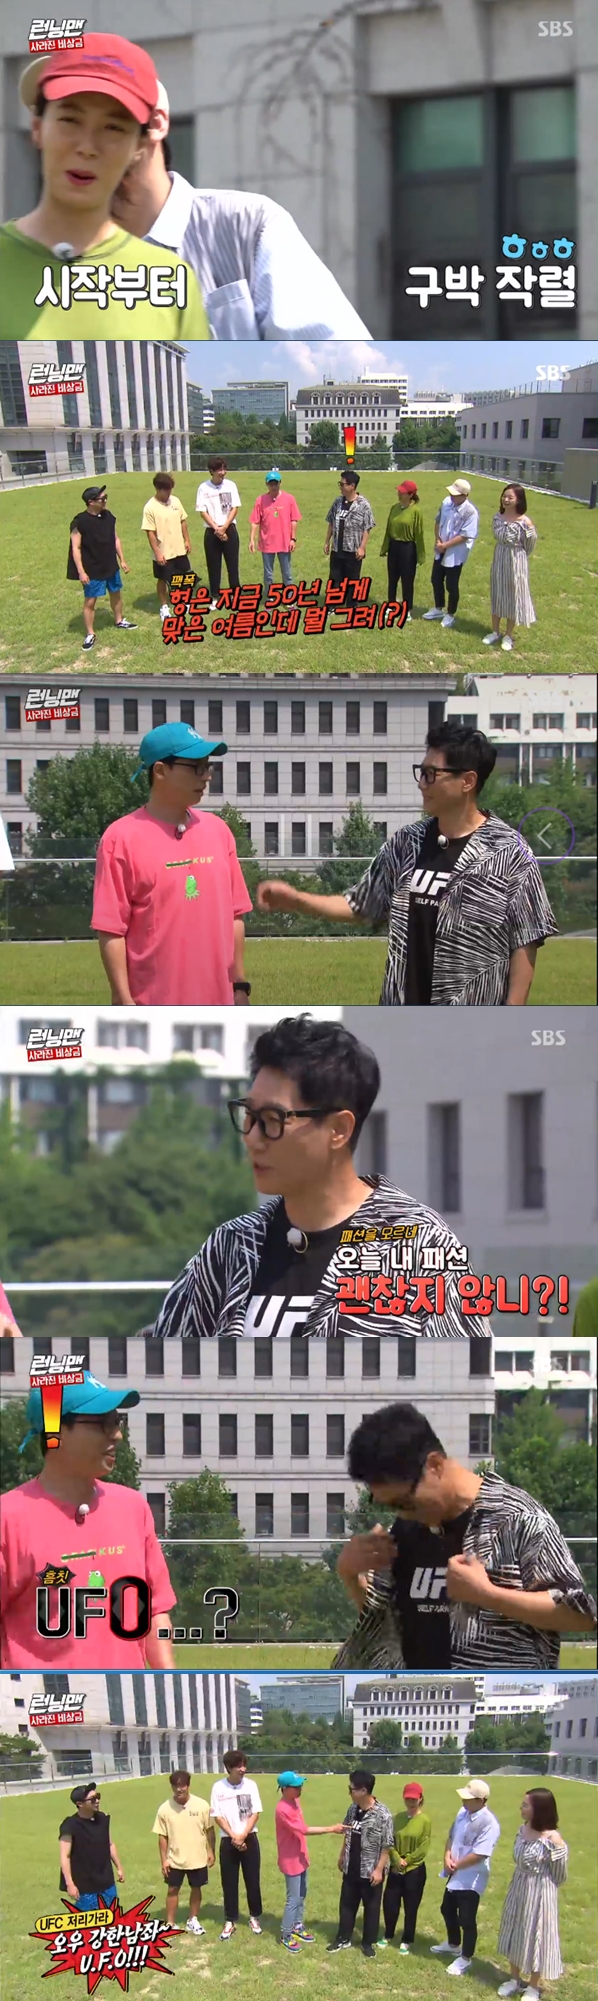 Yoo Jae-Suk has been busy teasing Ji Suk-jin.In the SBS entertainment program Running Man broadcasted on the afternoon of the 18th, members who are opening at the time when the hot heat is on the rise came out.Ji Suk-jin started grumbling, saying its too hot today before starting the opening.Yoo Jae-Suk, who arrived a little later than the members, started to argue, Is it natural that Summer is hot?Kim Jong Kook was satisfied that I did not say it last year. Yoo Jae-Suks joke did not end here.He laughed when he told Ji Suk-jin, What is Summer for 50 years?Yoo Jae-Suk also pointed out Ji Suk-jins fashion.Ji Suk-jin asked the members, Is not my fashion okay today? but Yoo Jae-Suk embarrassed Ji Suk-jin by pointing out that Ji Suk-jins T-shirt had a UFO rather than a UFC.